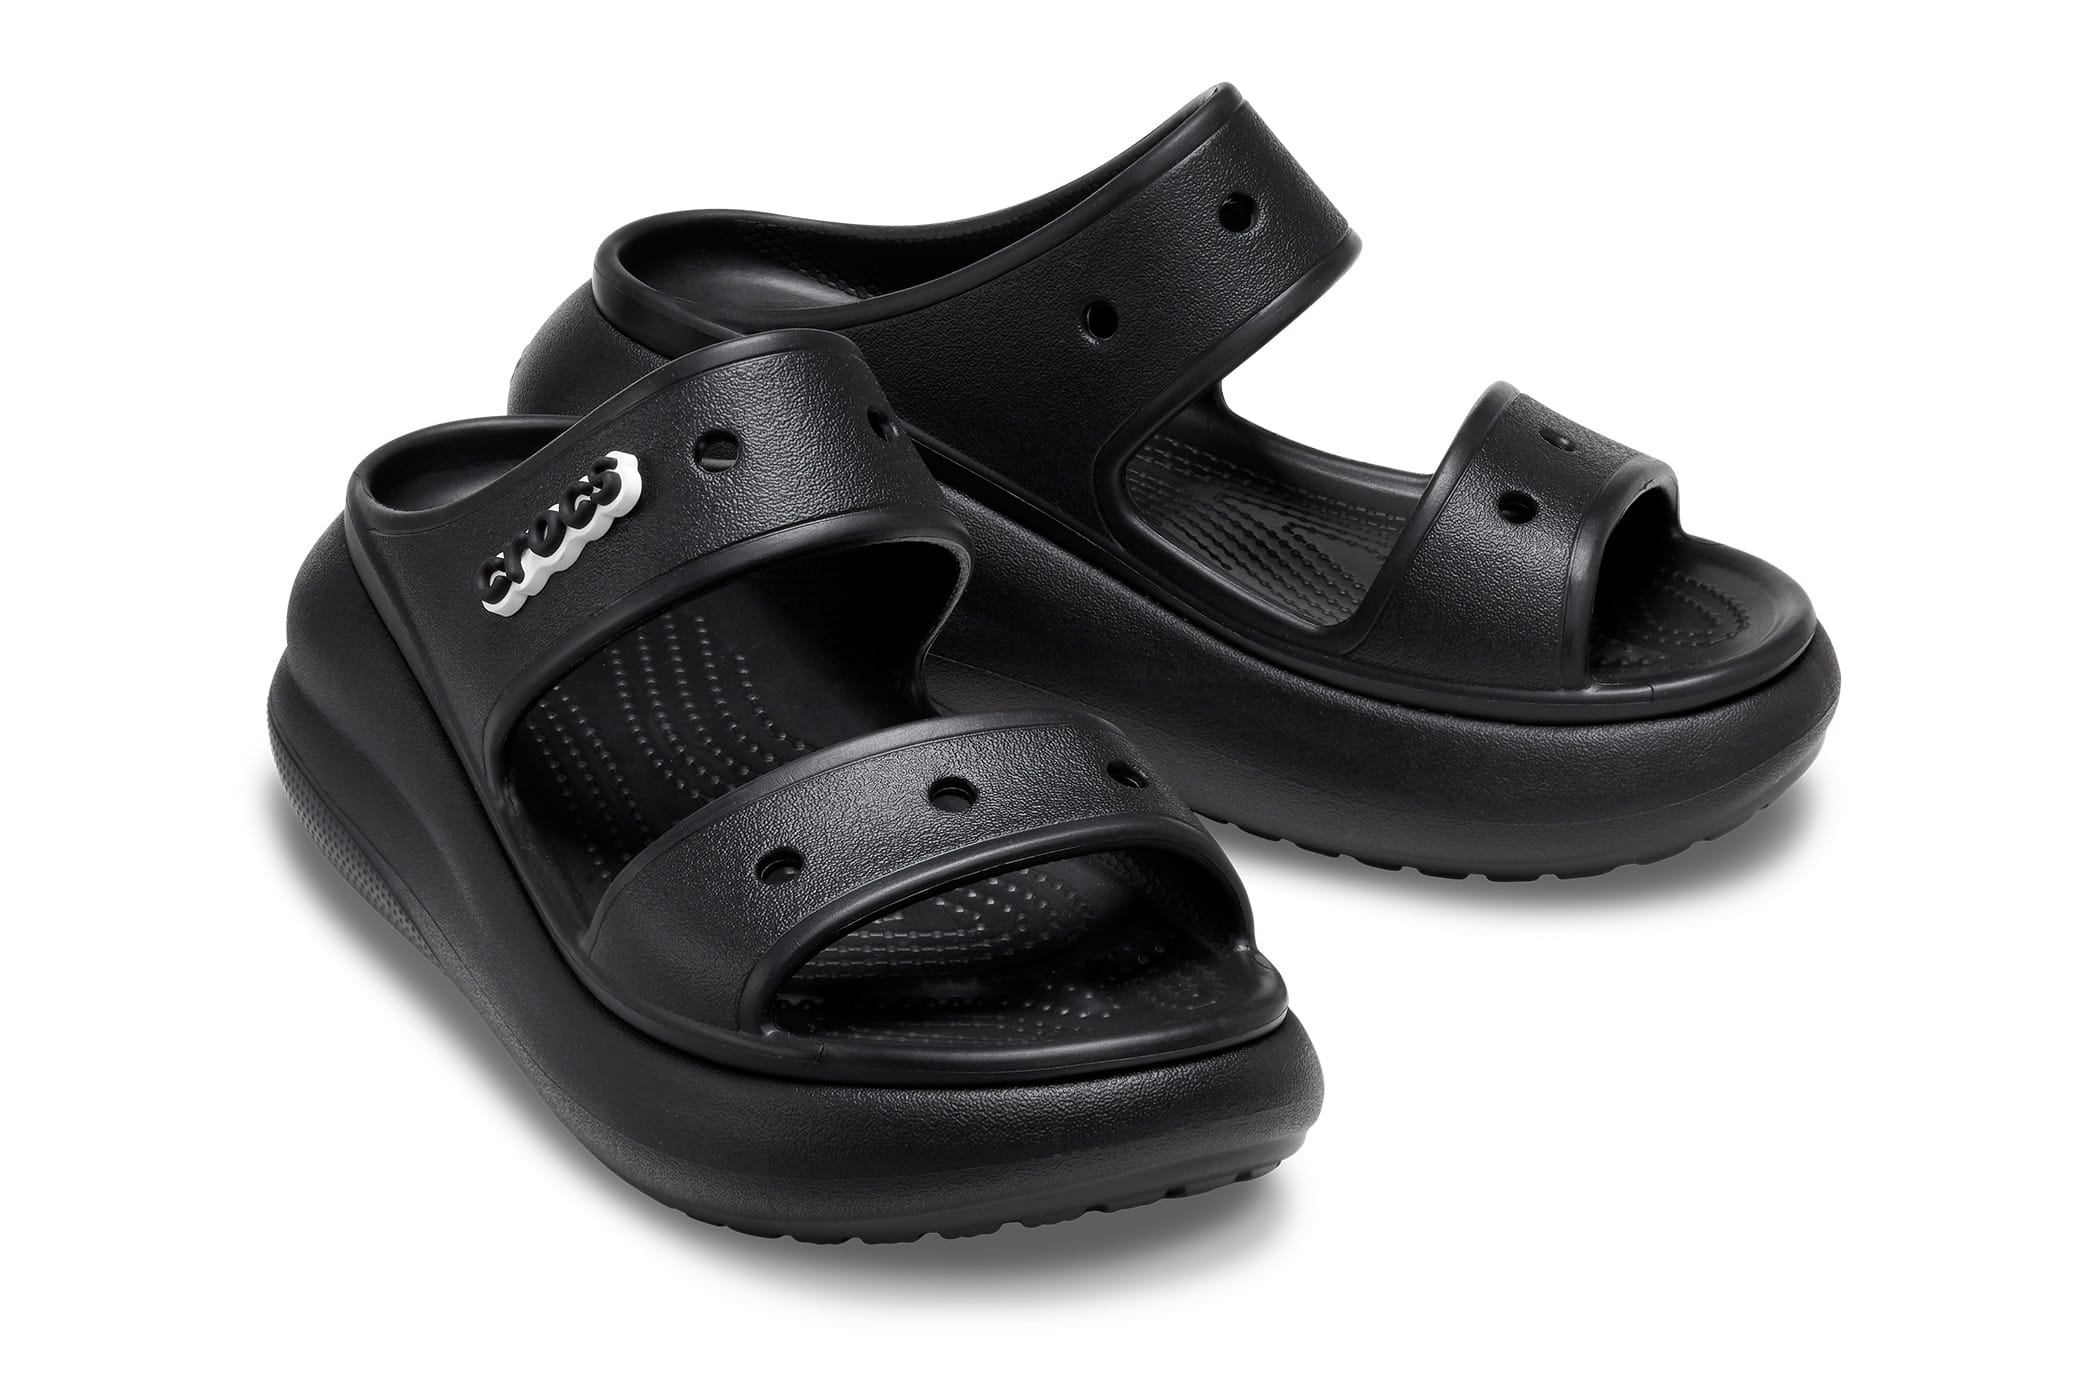 The New Crocs Slides Are Already Selling Out Thanks to TikTok